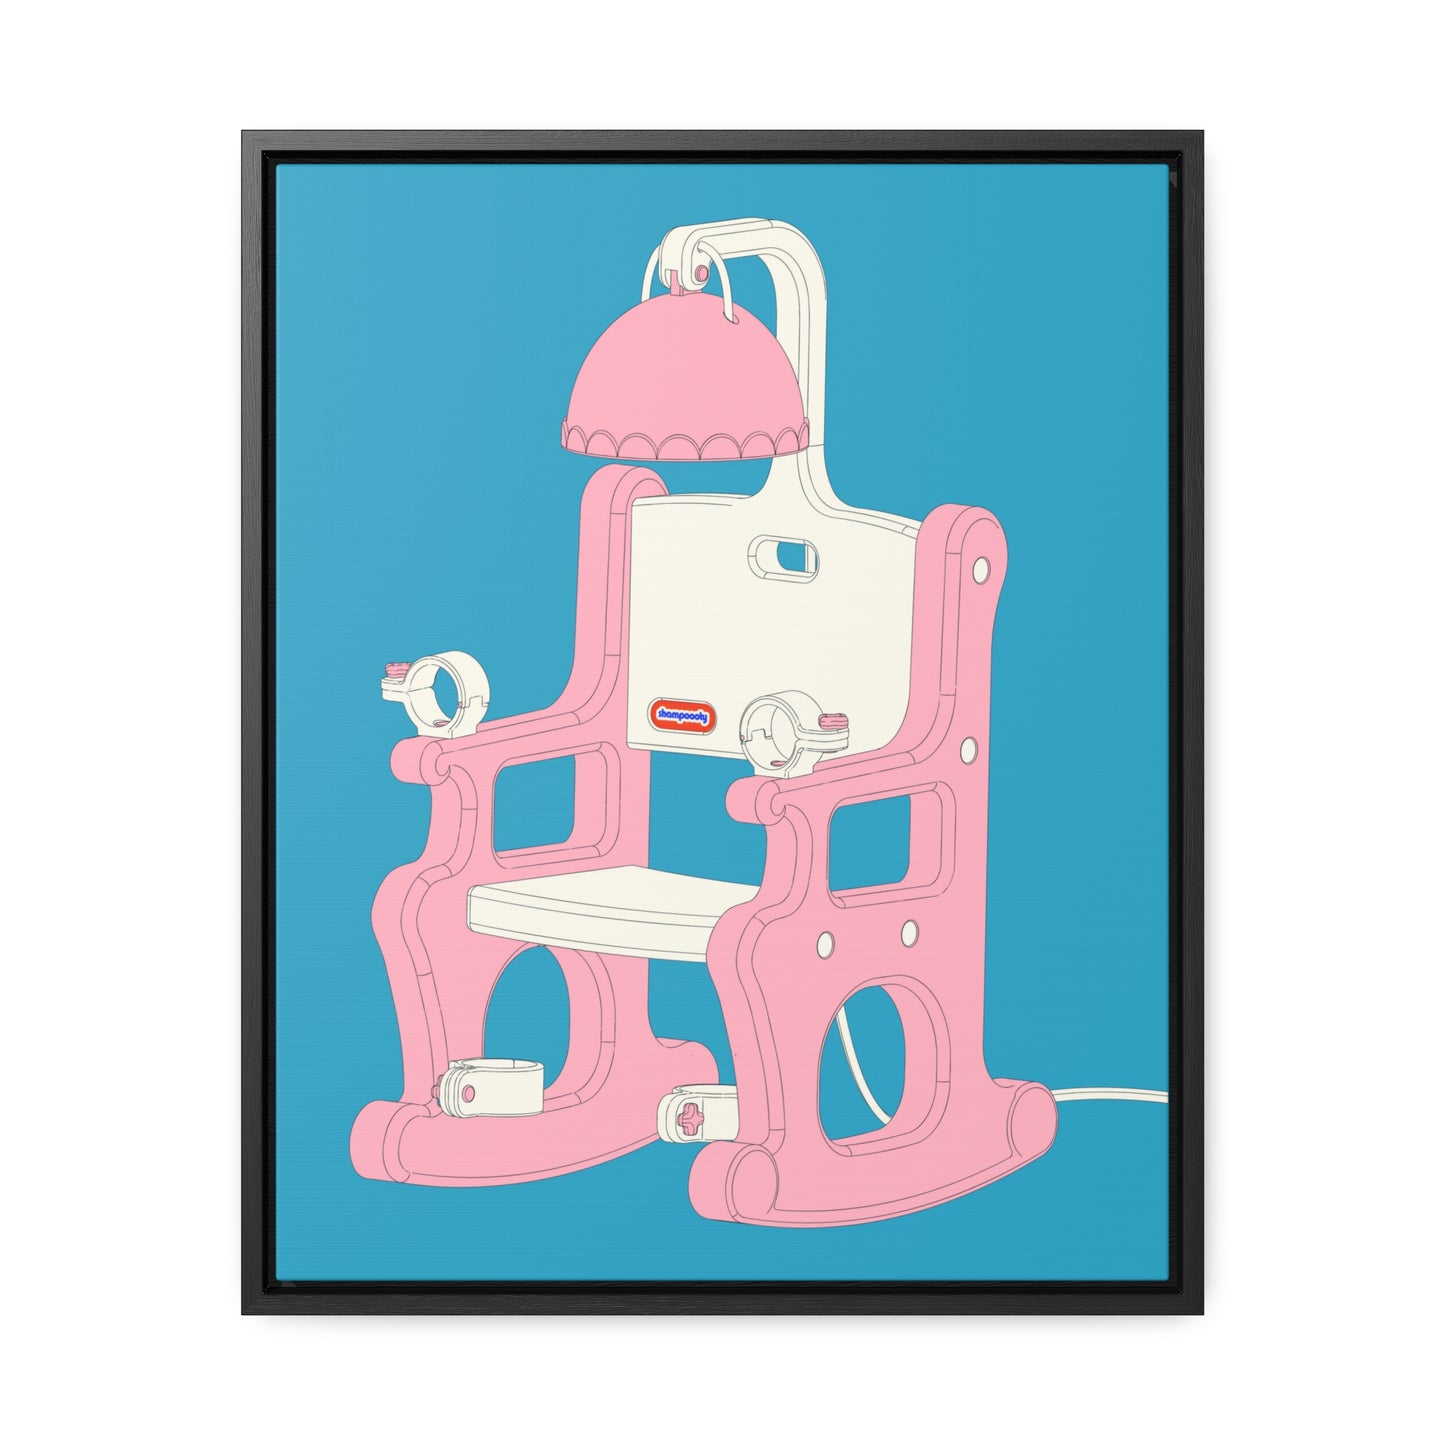 Electric Chair Gallery Wrap (Illustrated Blue) Framed